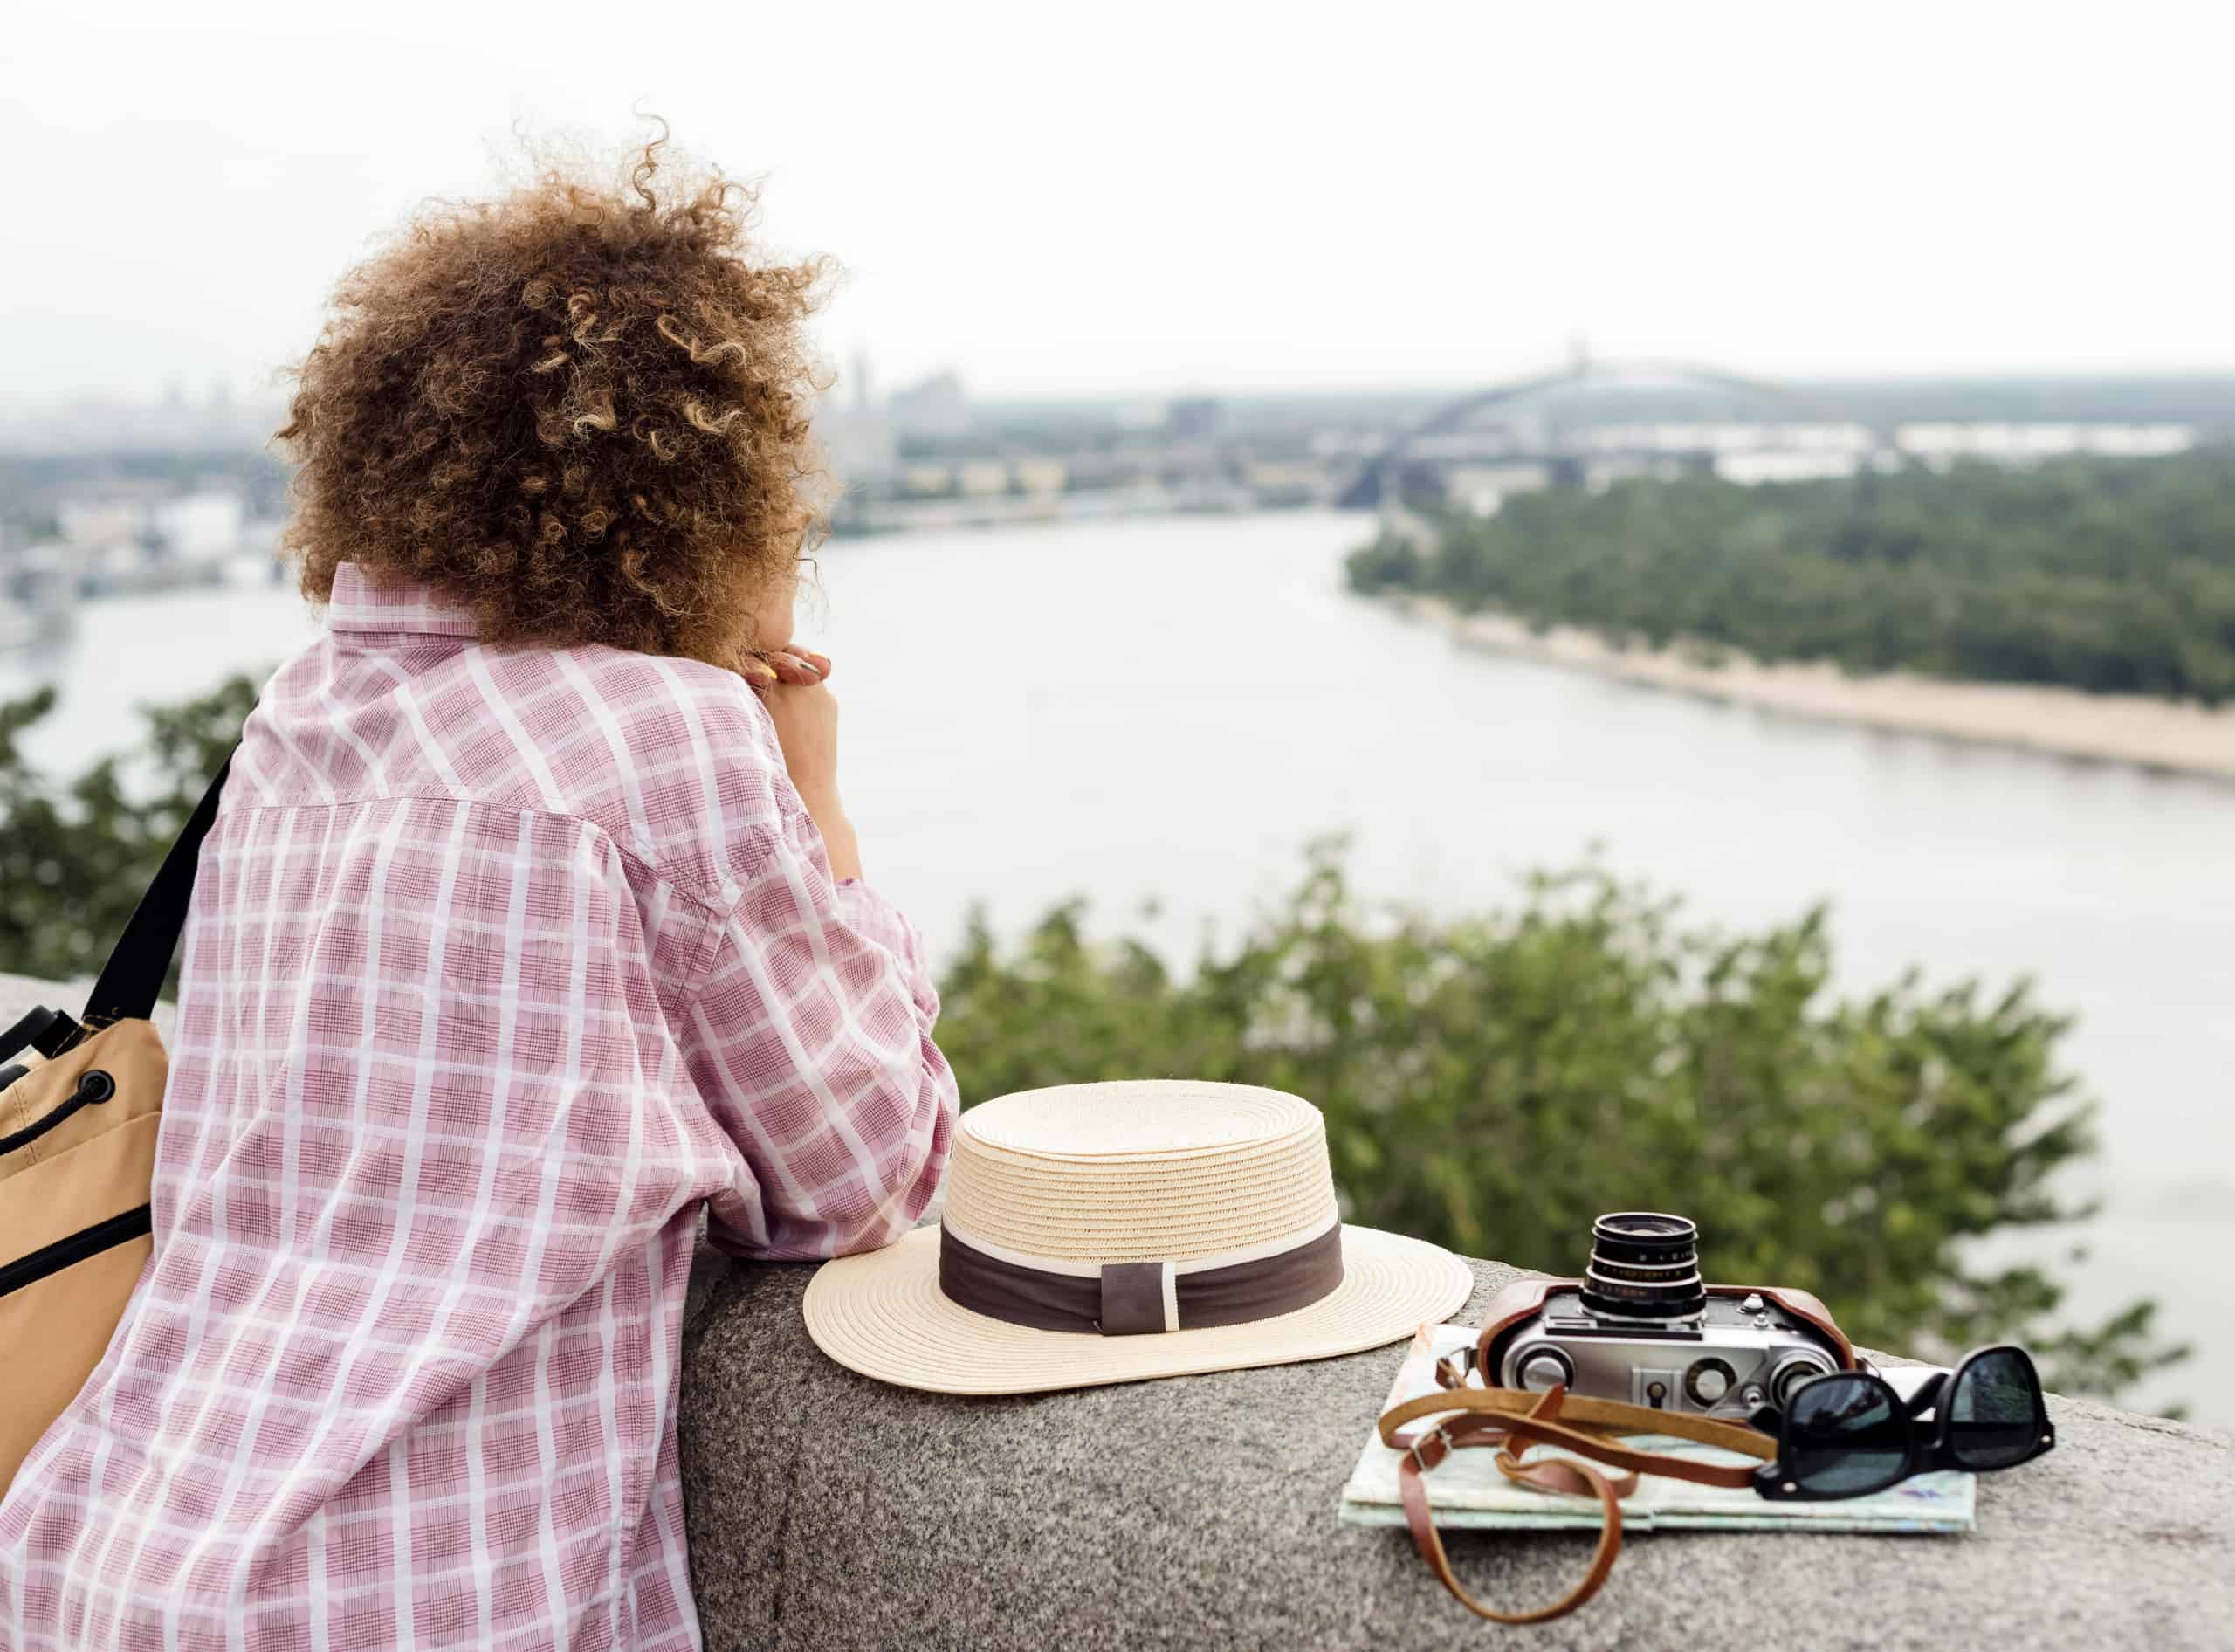 The Benefits of Slow Travel: Why Taking Your Time Can Make For a More Meaningful Trip